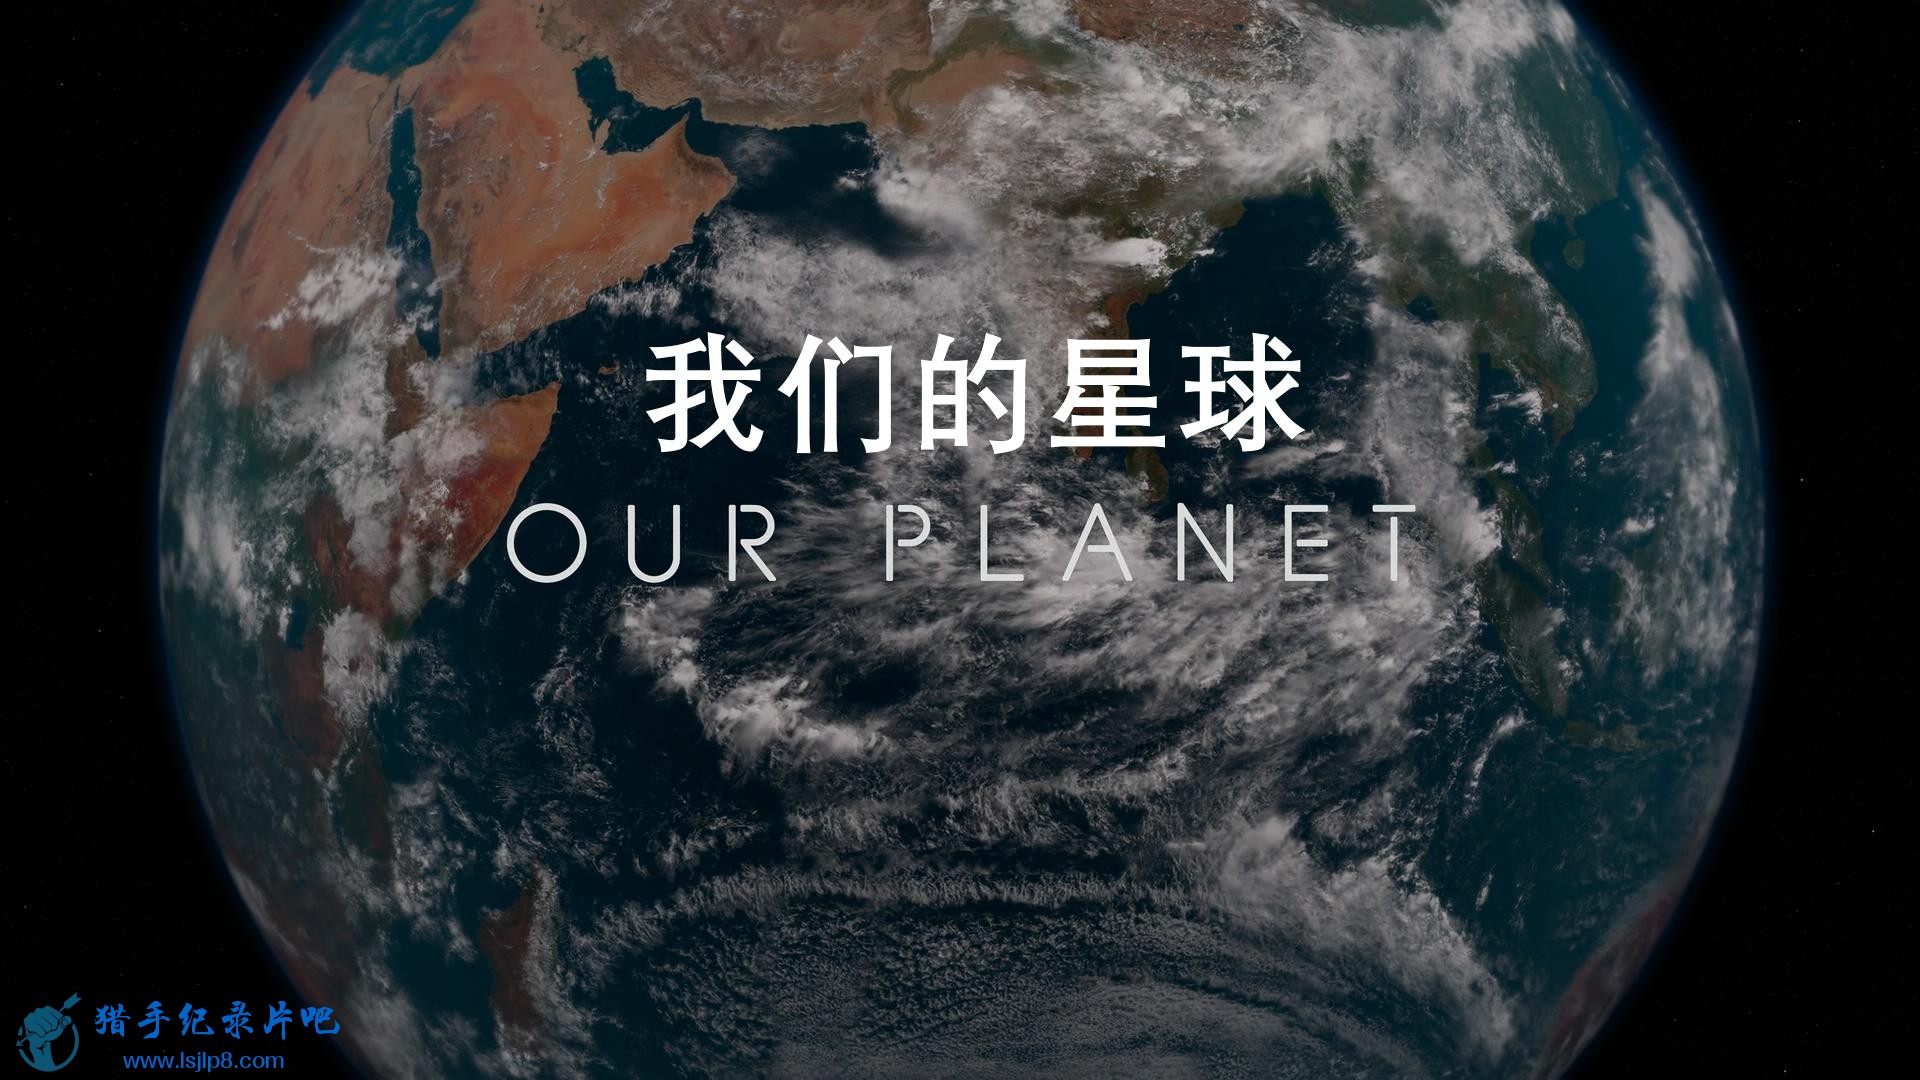 Our.Planet.2019.S01E01.One.Planet.1080p.NF.WEBRip.DDP5.1.x264-NTb_20190825154928.JPG